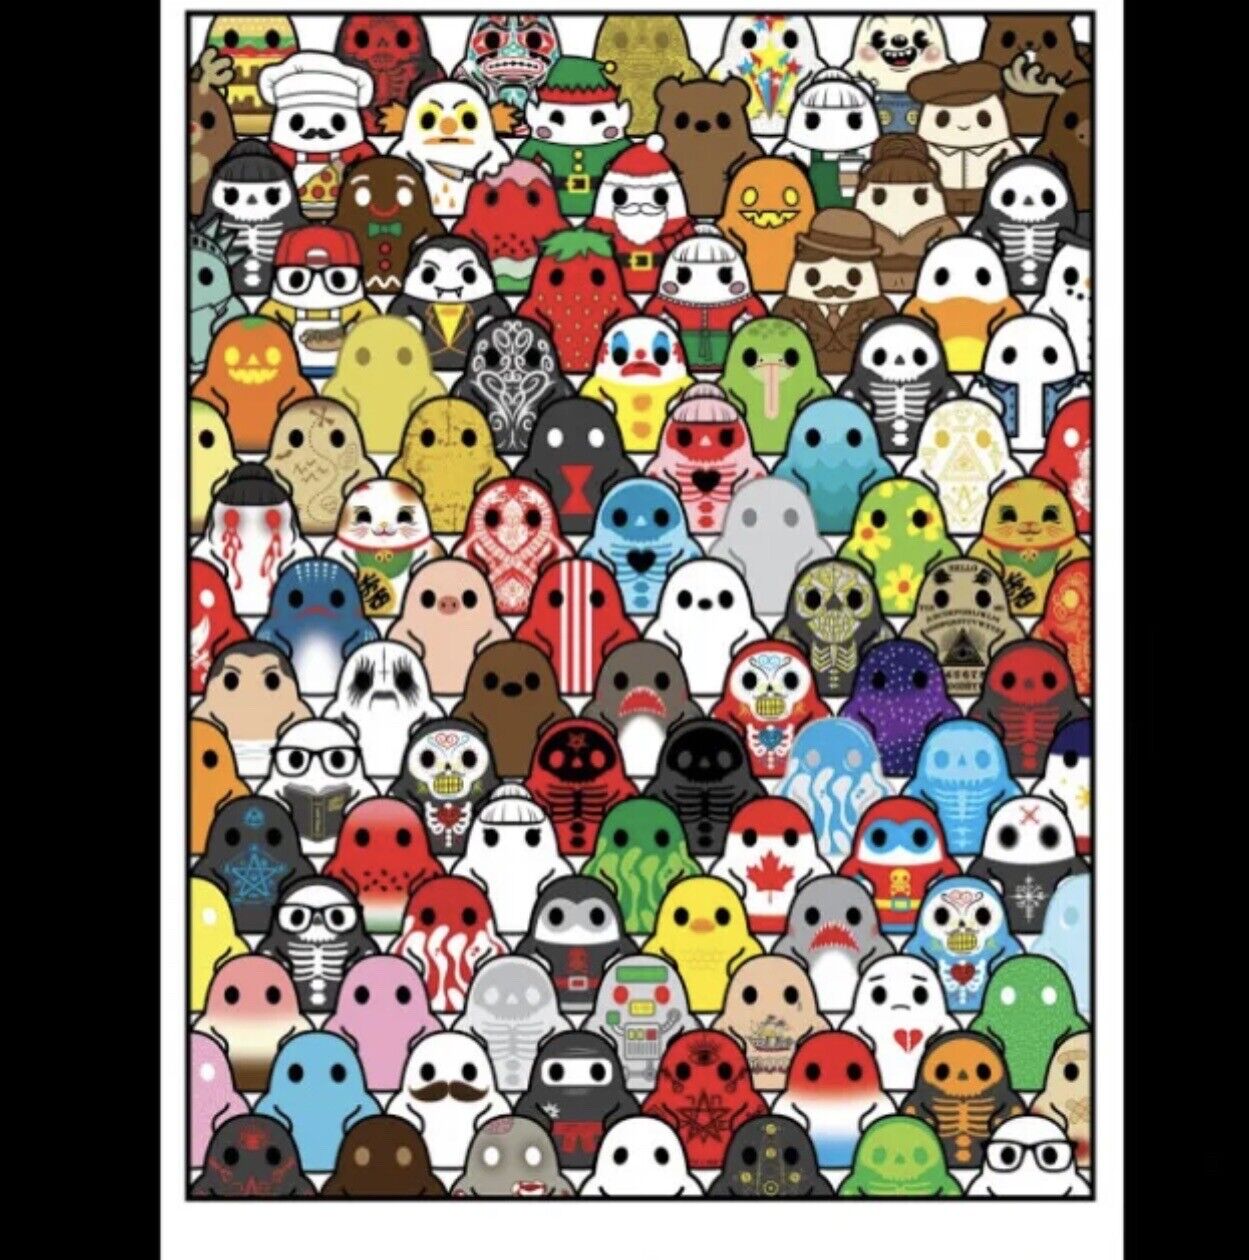 Bimtoy Tiny Ghost Art Print Forever Haunted Signed By Reis O’Brien # 69/275 New